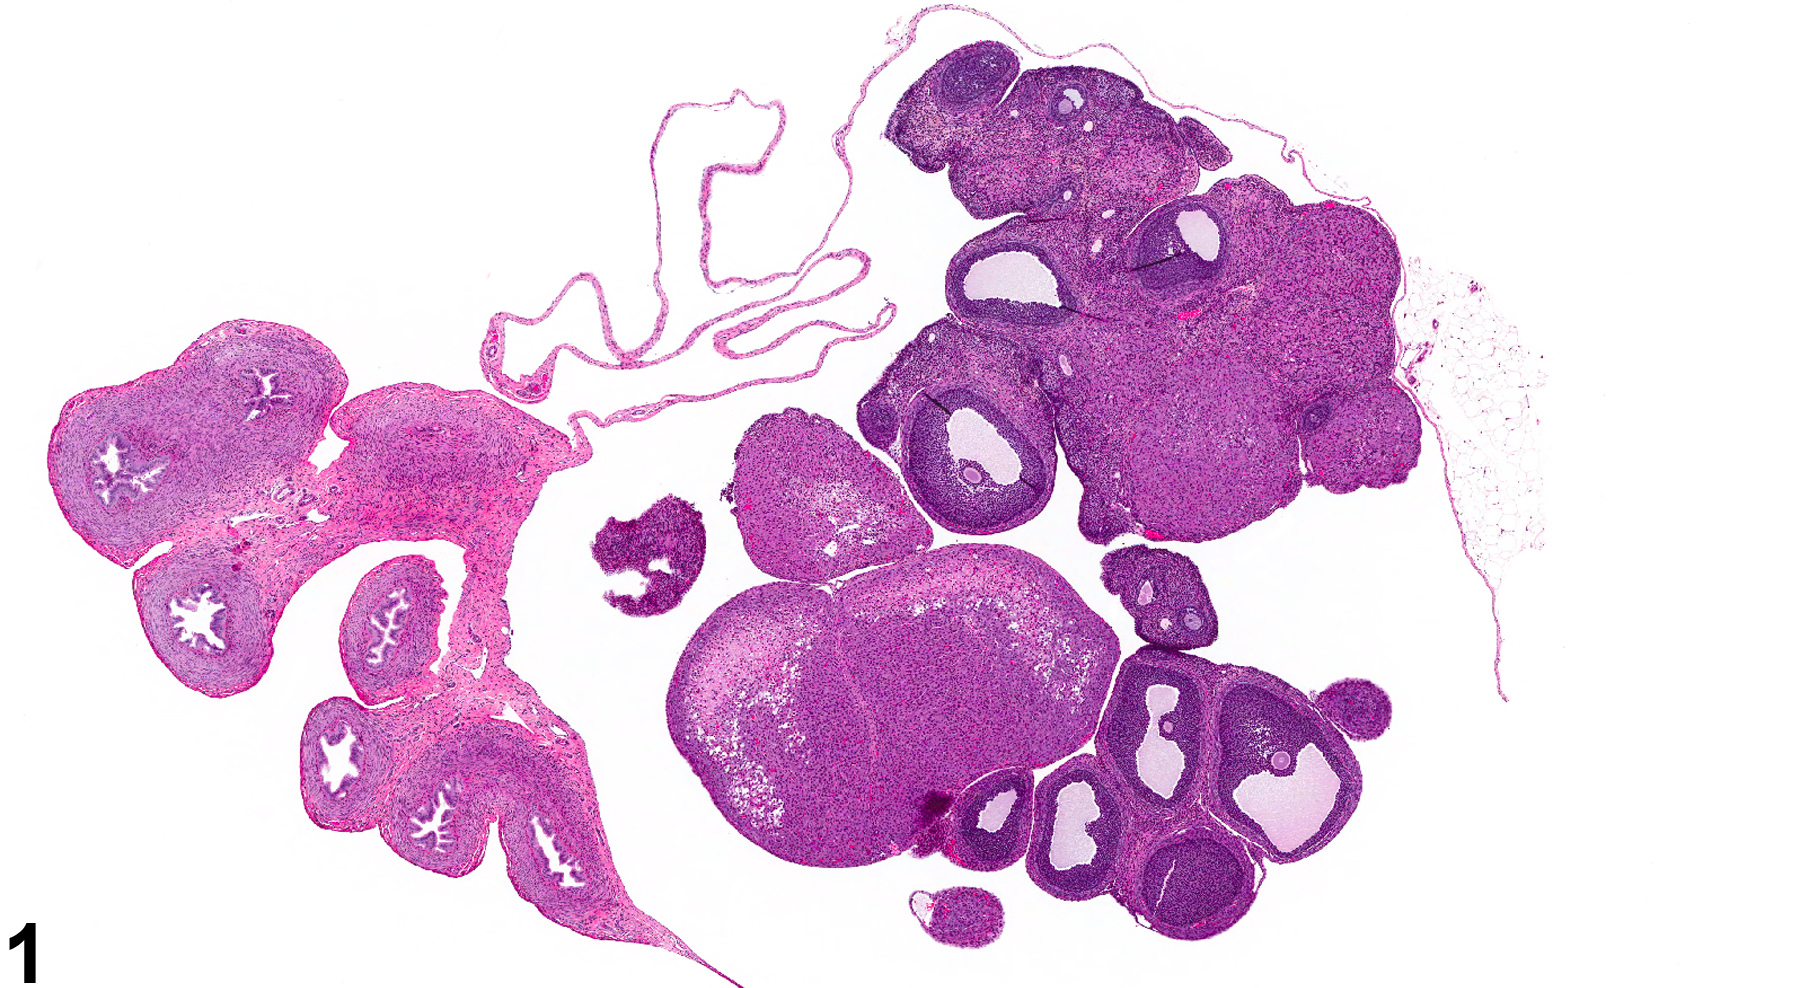 Image of bursal cyst in the ovary from a female F344/N rat in a subchronic study